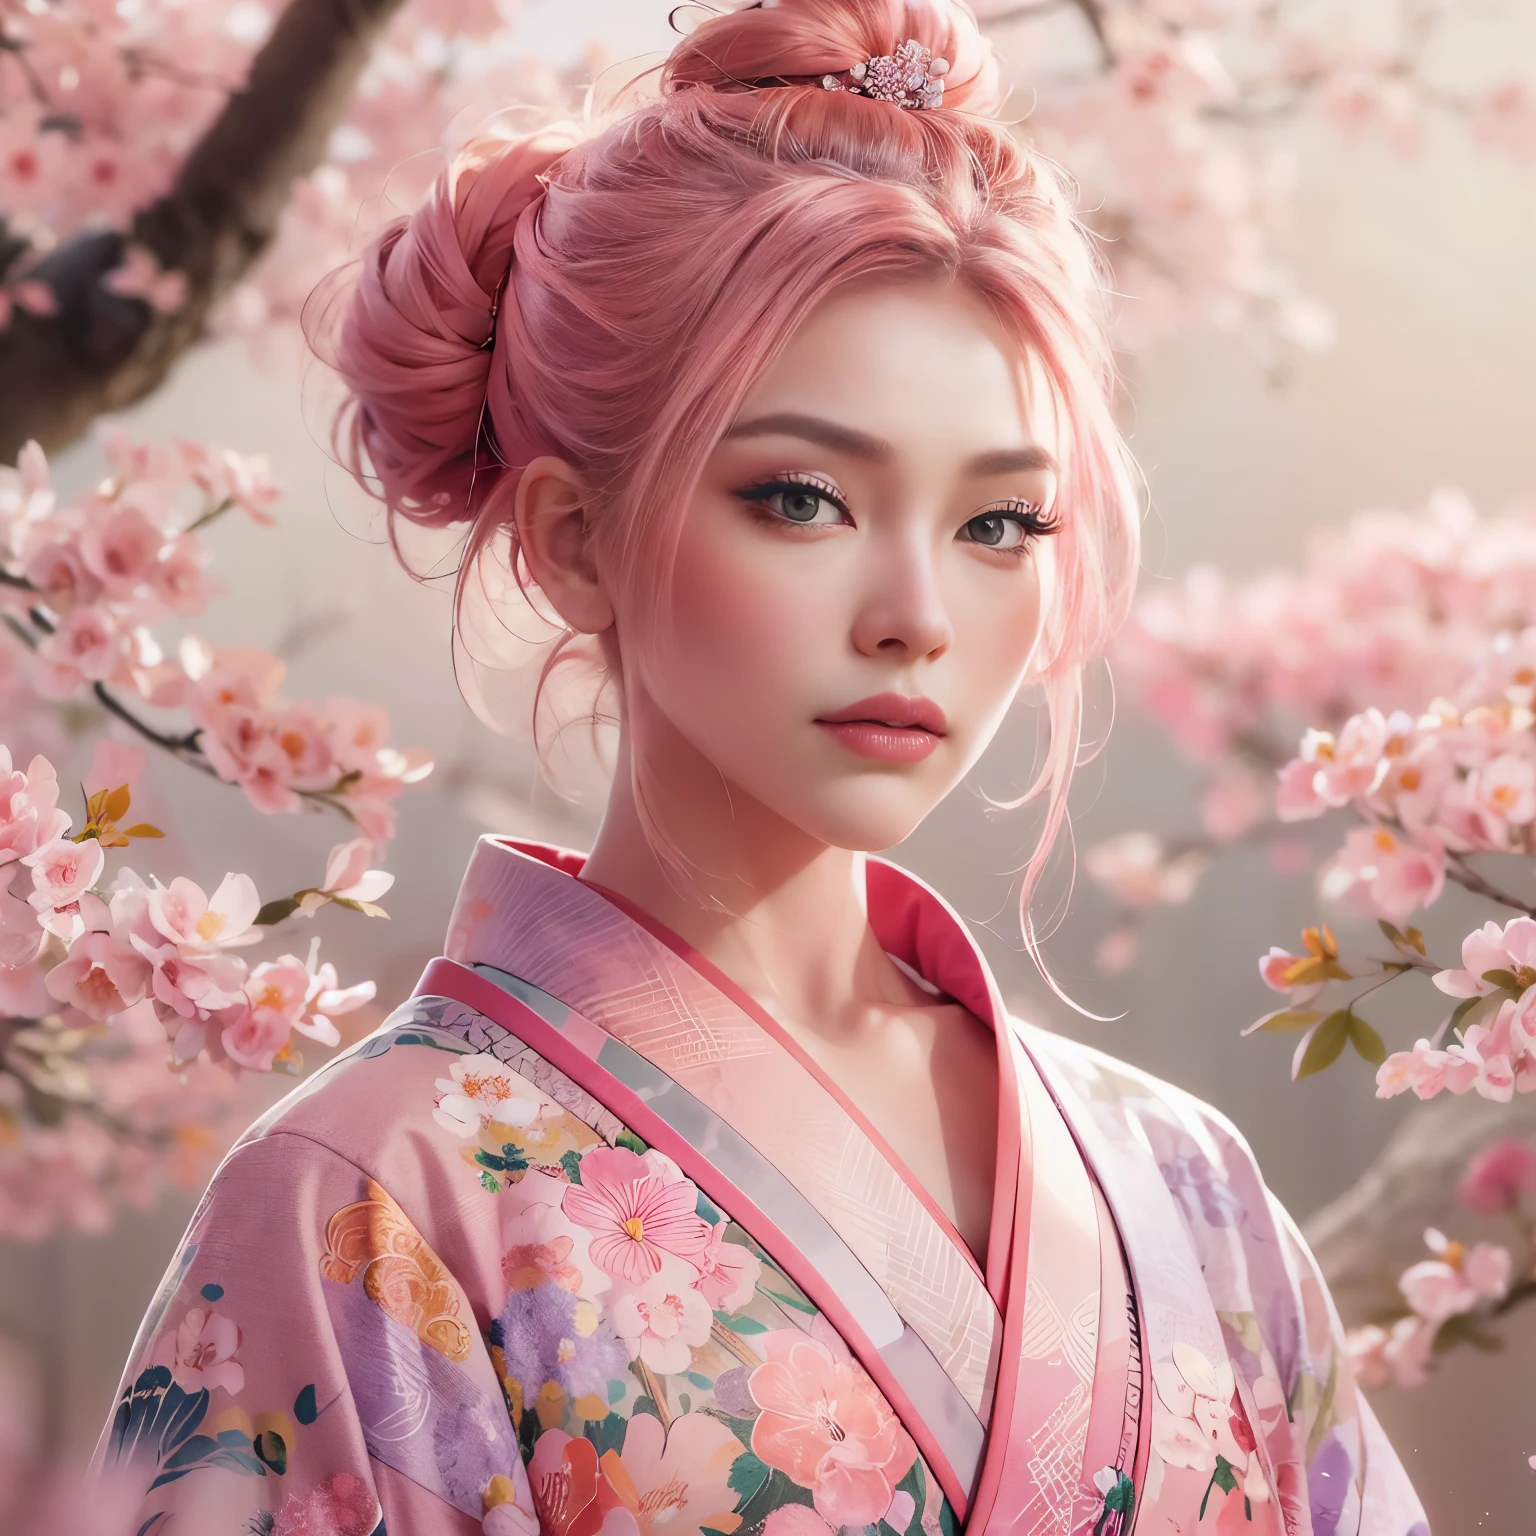 A hyper-realistic, highly detailed, and high-resolution 16k image of a young, beautiful female with engfa face. she has top bun pink hair and translucent skin, and  dressed in a traditional pink Japanese kimono with a small flower design. The image captures the ethereal beauty and mystique of the spirit world. The style  inspired by the delicate, soft aesthetic found in traditional Japanese art. The background was full of pink sakura tree.